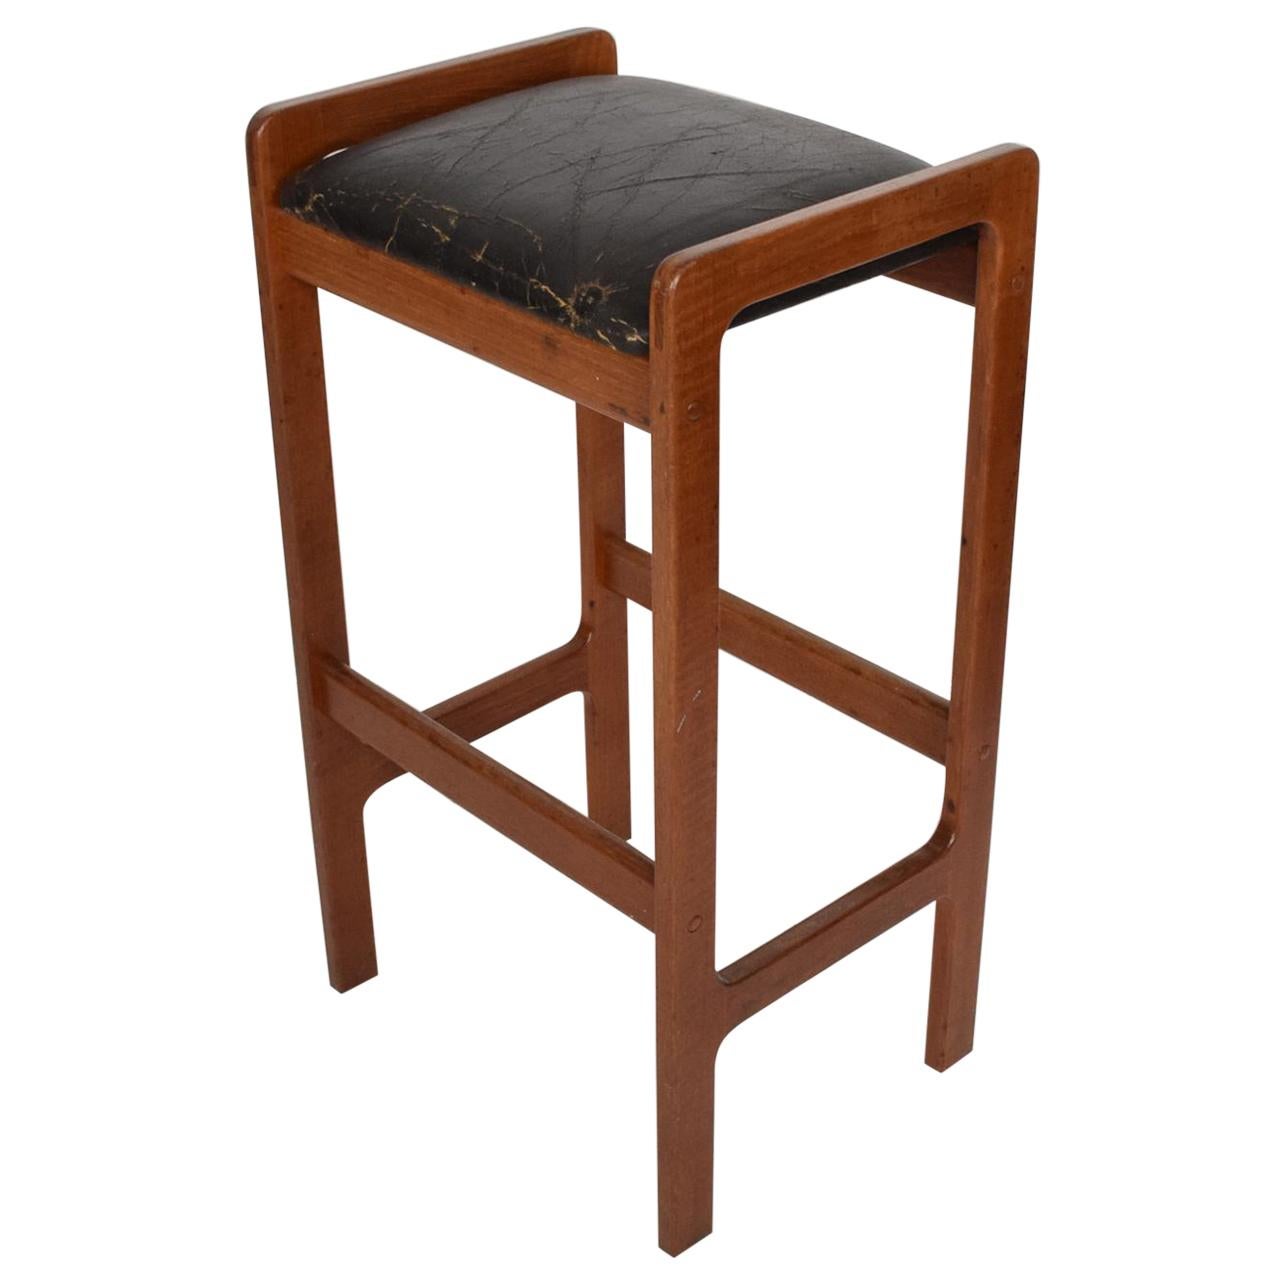 1970s Scandinavian Modern Teak Bar Stool with distressed black leather seat.
Made in Denmark. No label present.
32.5 H x 14.25 D x 18.25 W
Preowned original unrestored vintage condition. Wood is in good condition. Leather is fabulously